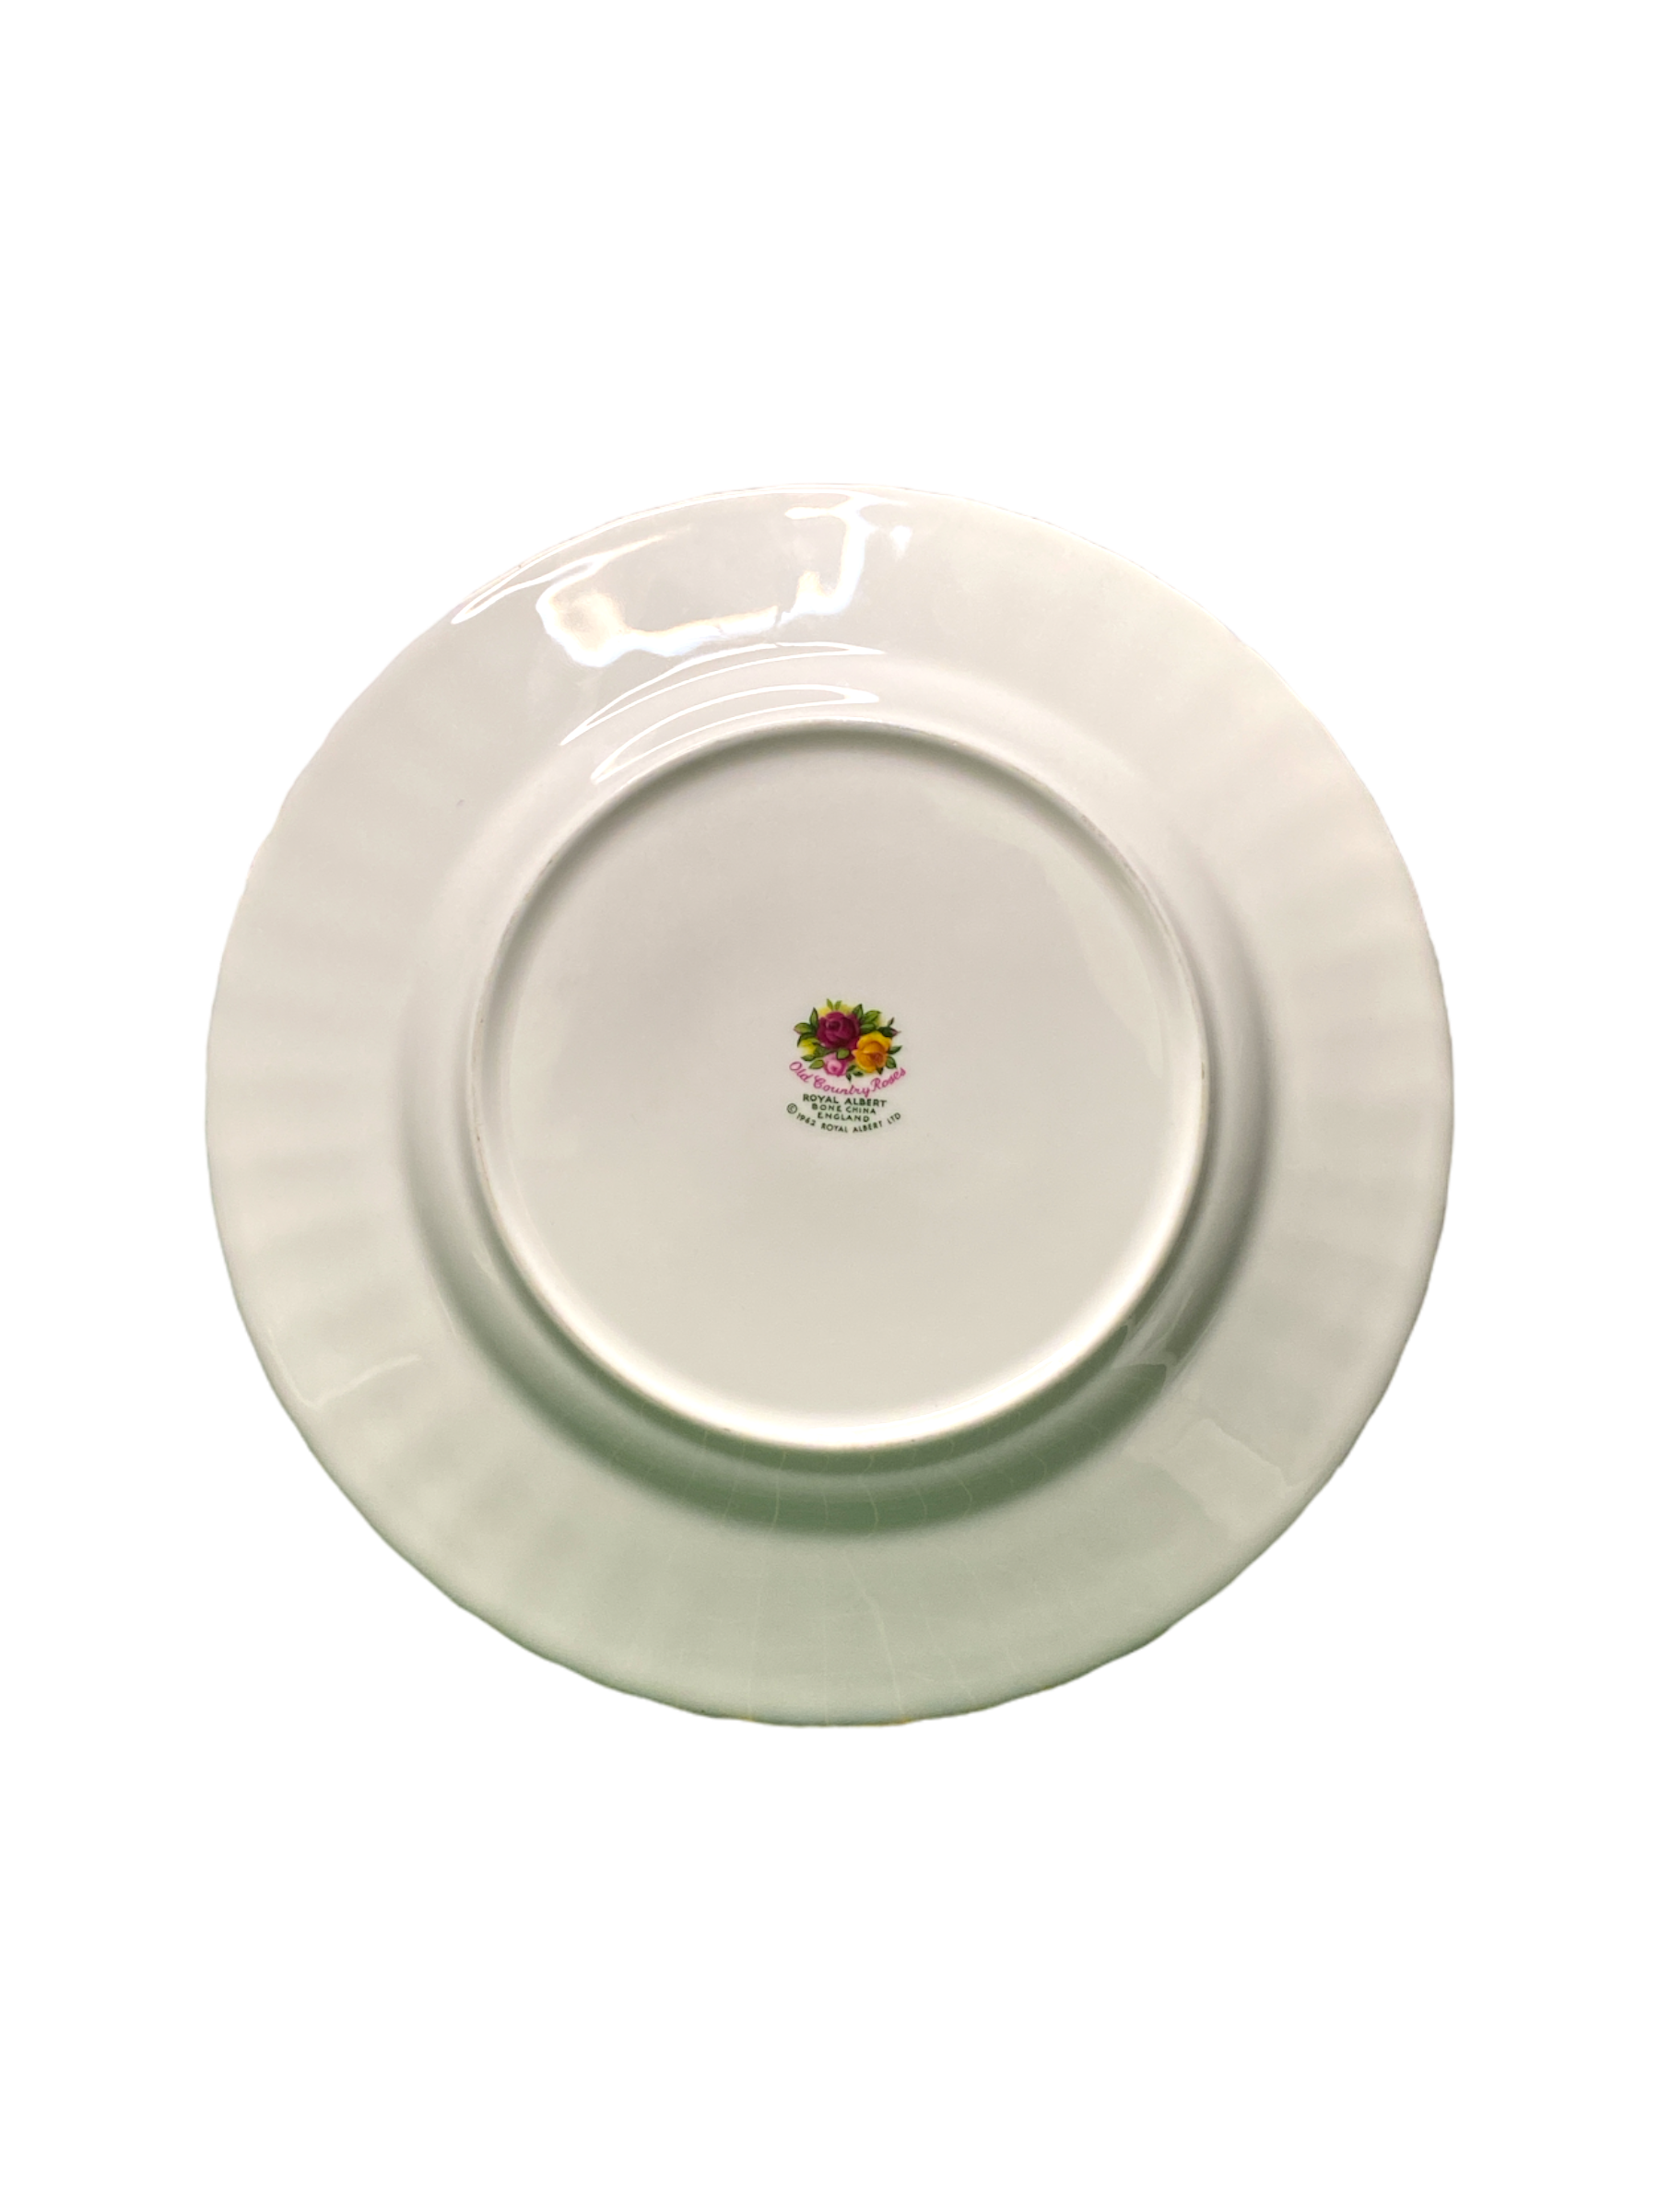 Royal Albert Old Country Roses Salad/Dessert Plate - First Quality